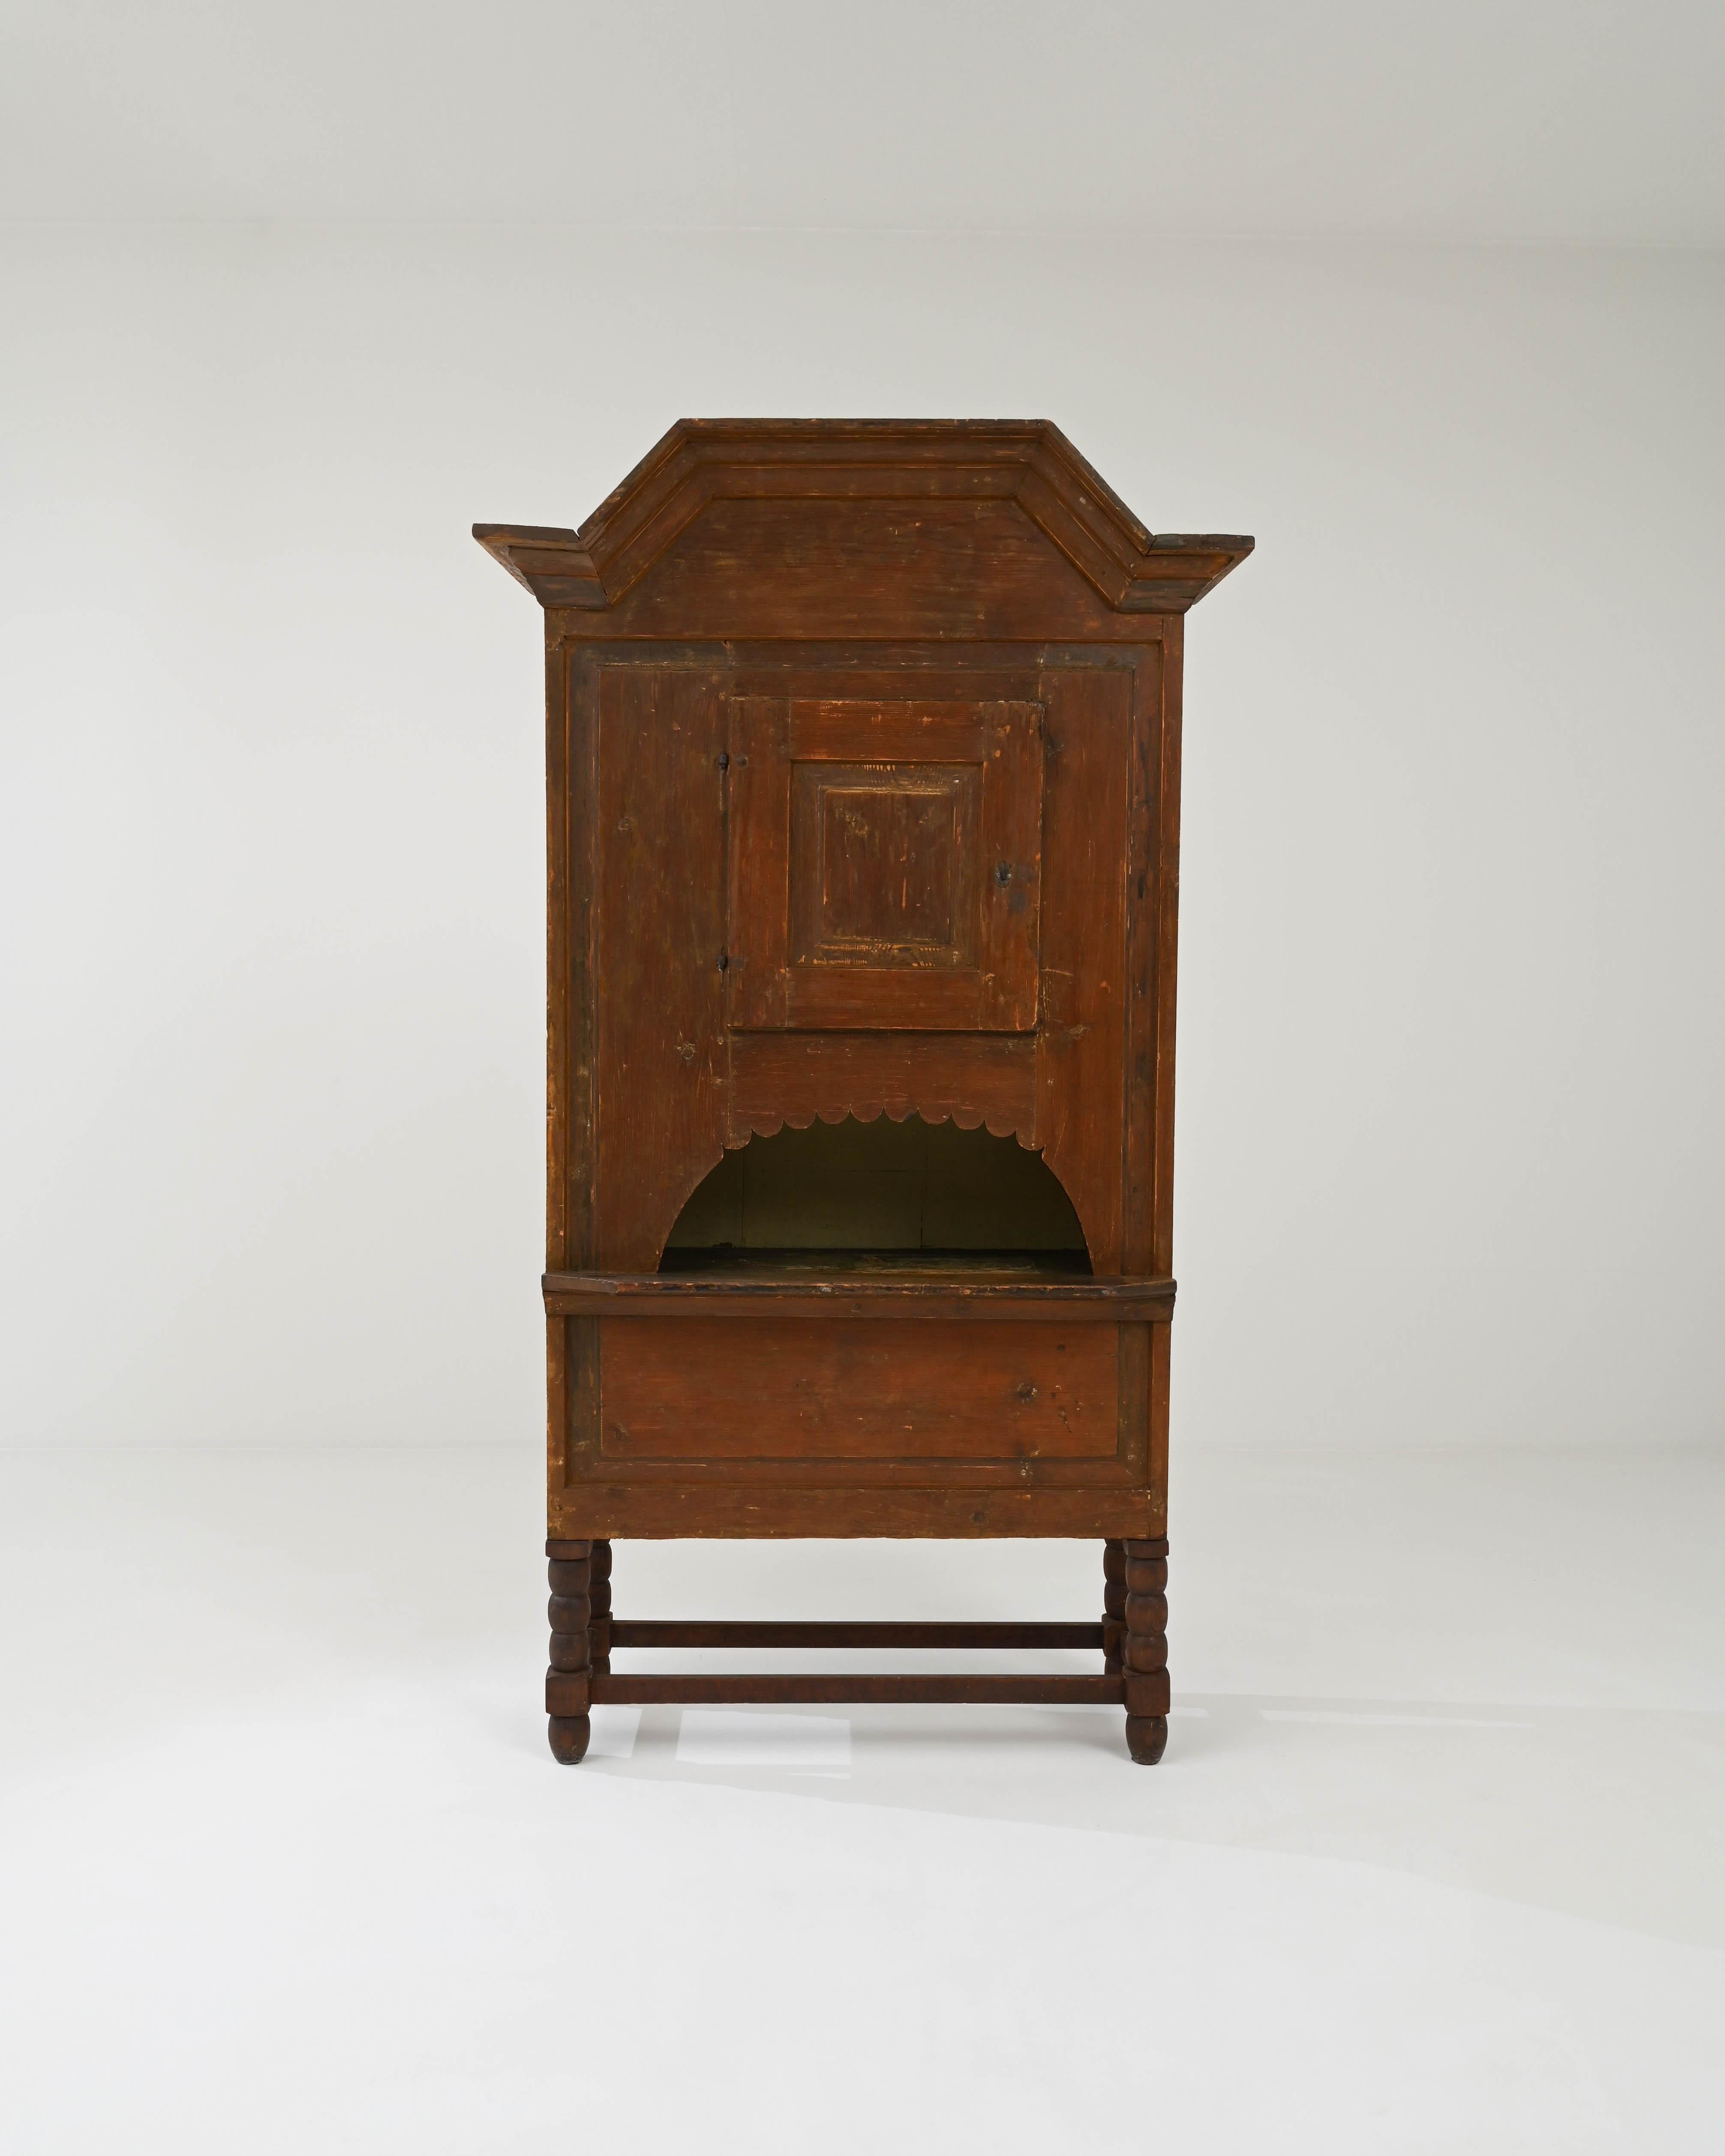 A wooden cabinet created in 1800s Sweden. Quiet and mysterious, this wooden cabinet communicates a sense of rich history and old-world artisanry. Carefully lathed and joined legs undergird the body of the cabinet, which features a curious little